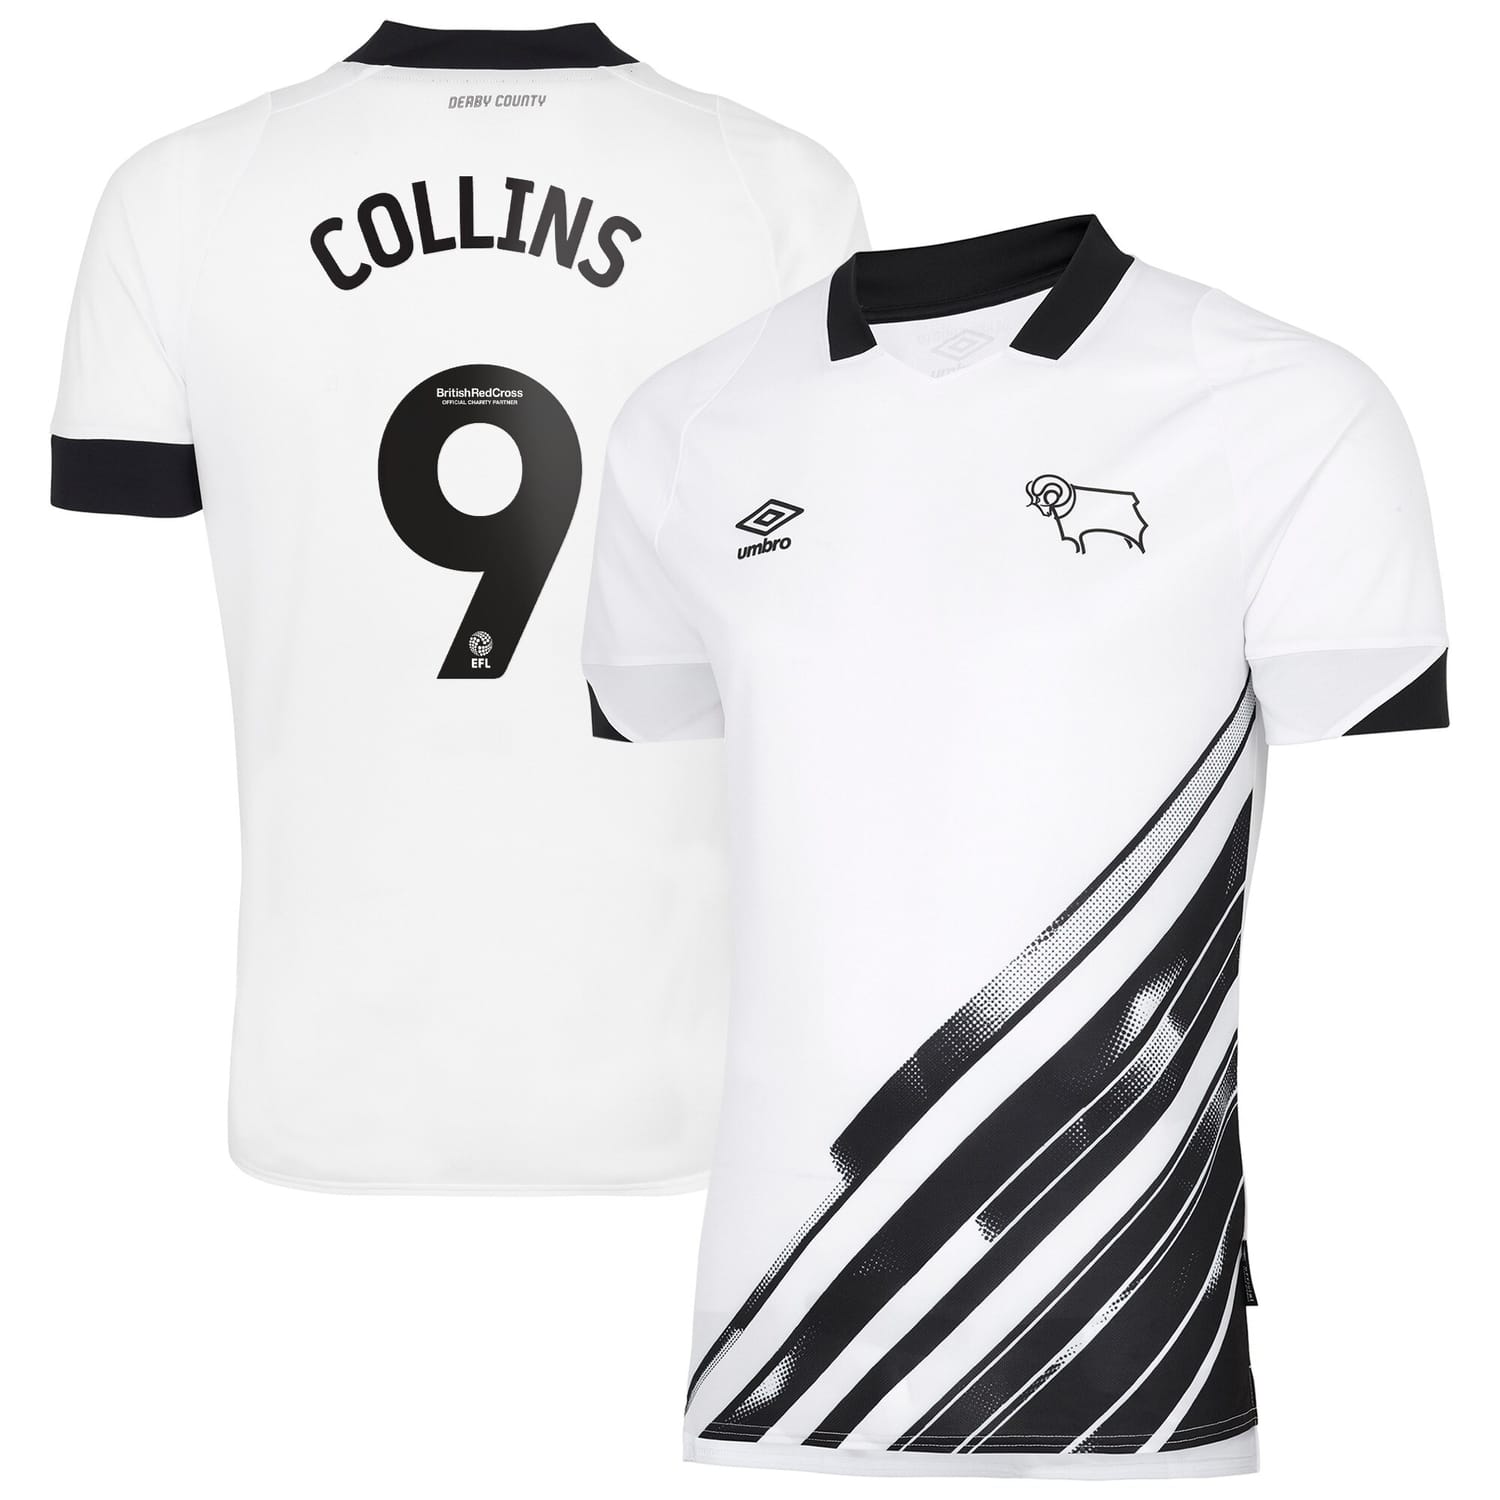 EFL League One Derby County Home Jersey Shirt 2022-23 player Collins 9 printing for Men